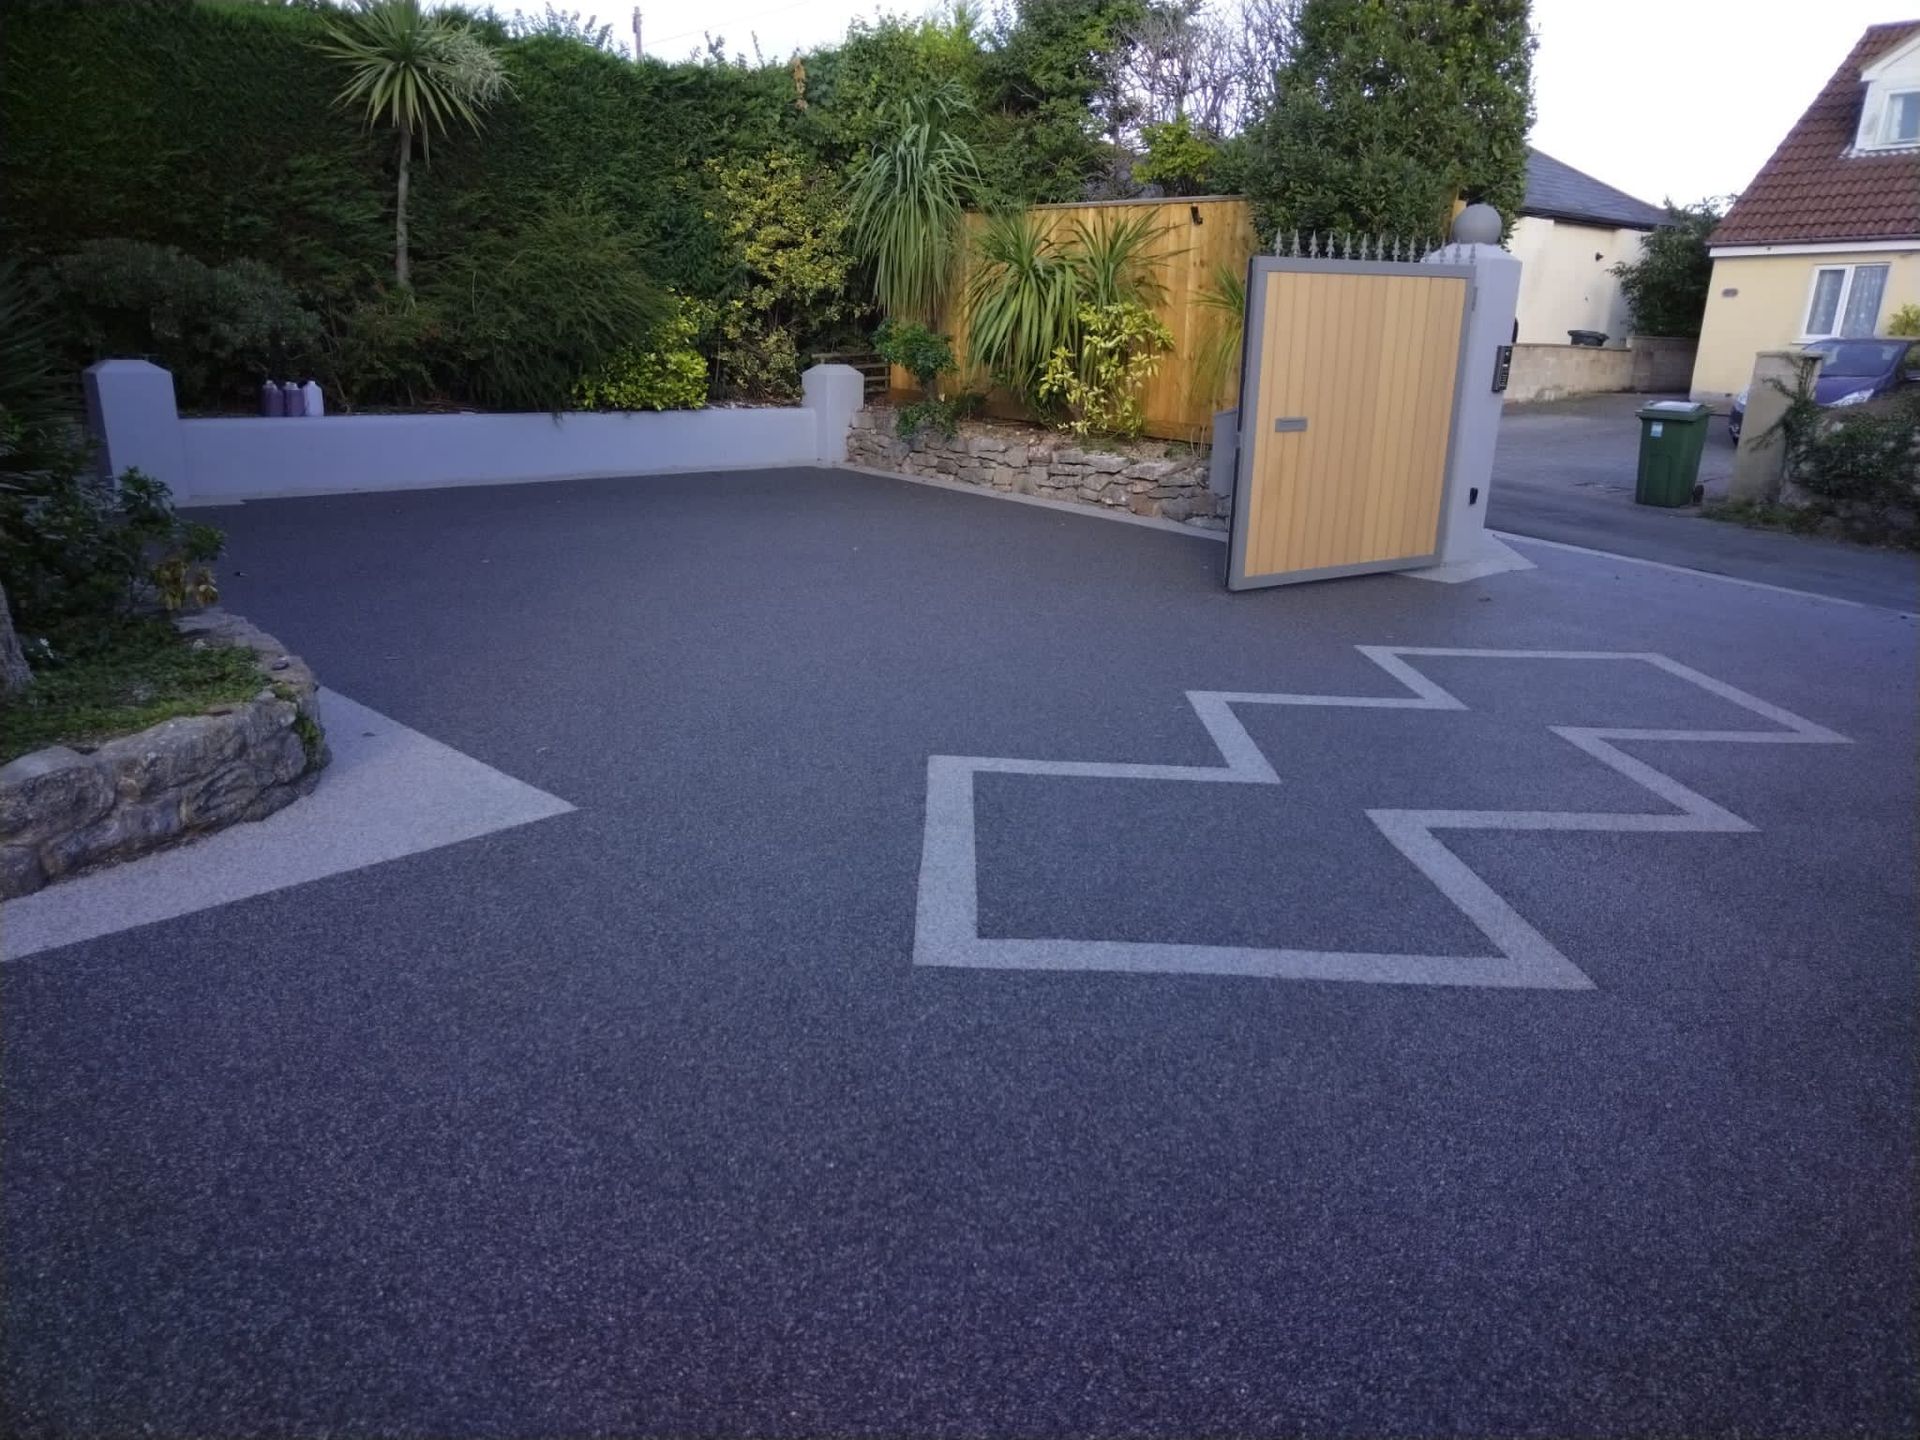 Black resin driveway with a grey pattern and border.